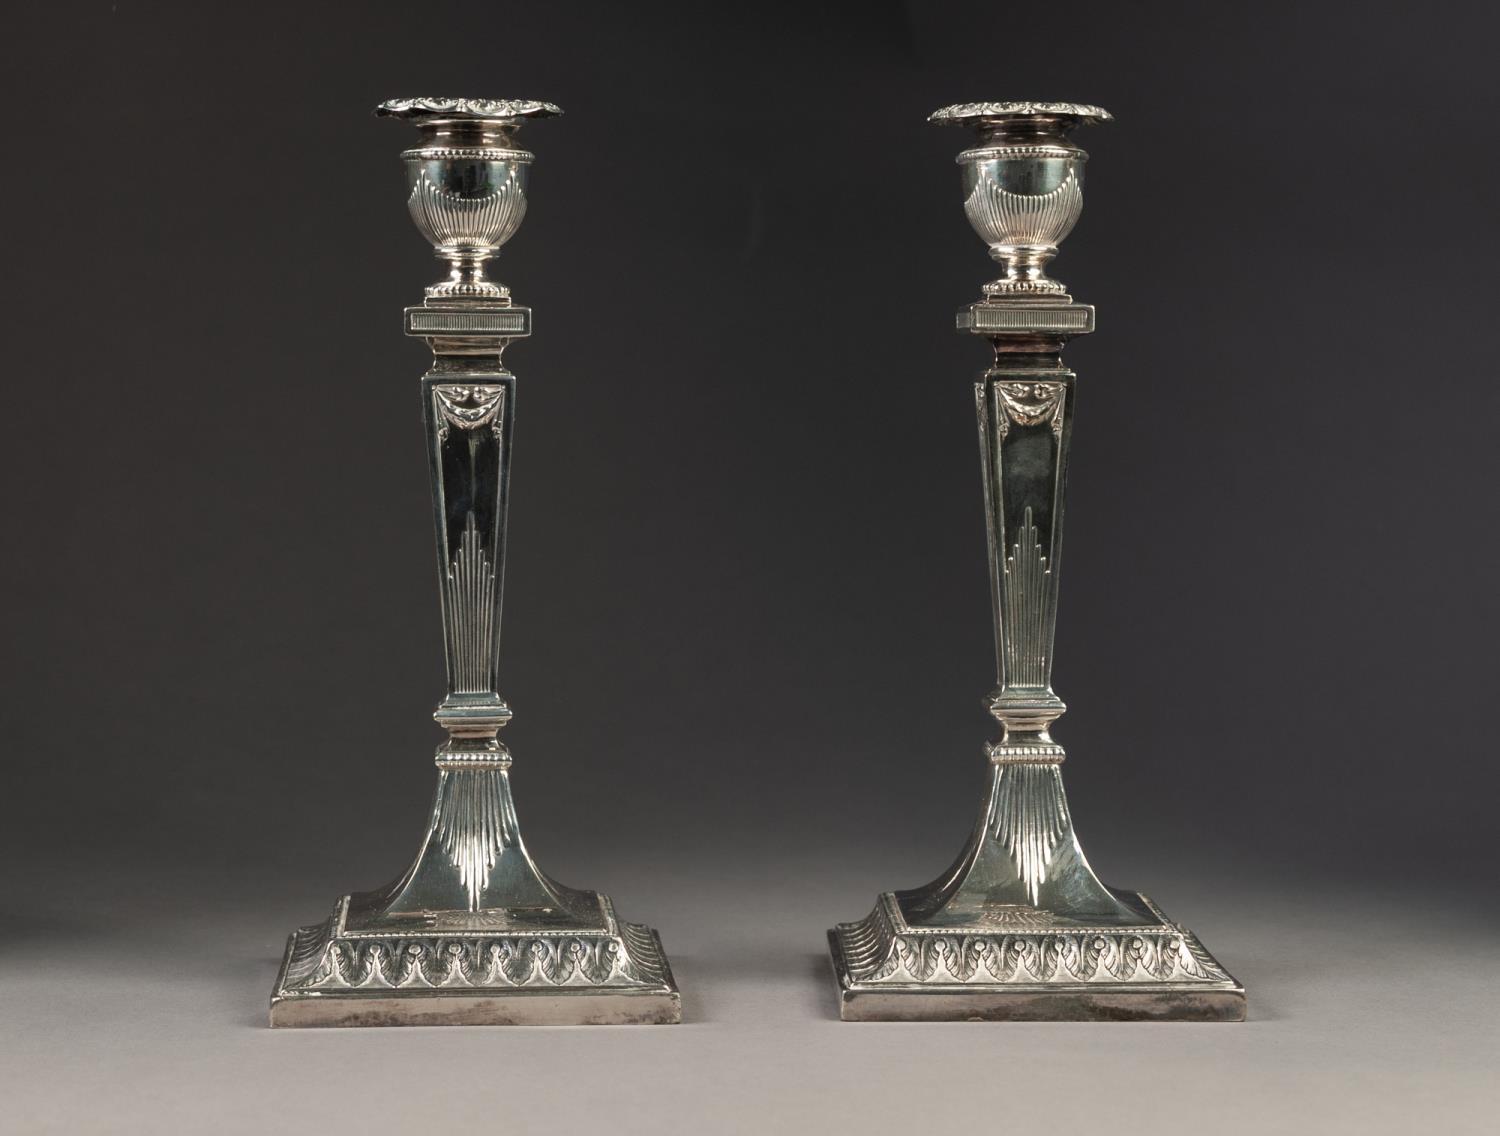 PAIR OF ELEGANT ADAM STYLE ELECTROPLATED TABLE CANDLESTICKS, each with an urn shaped sconce,